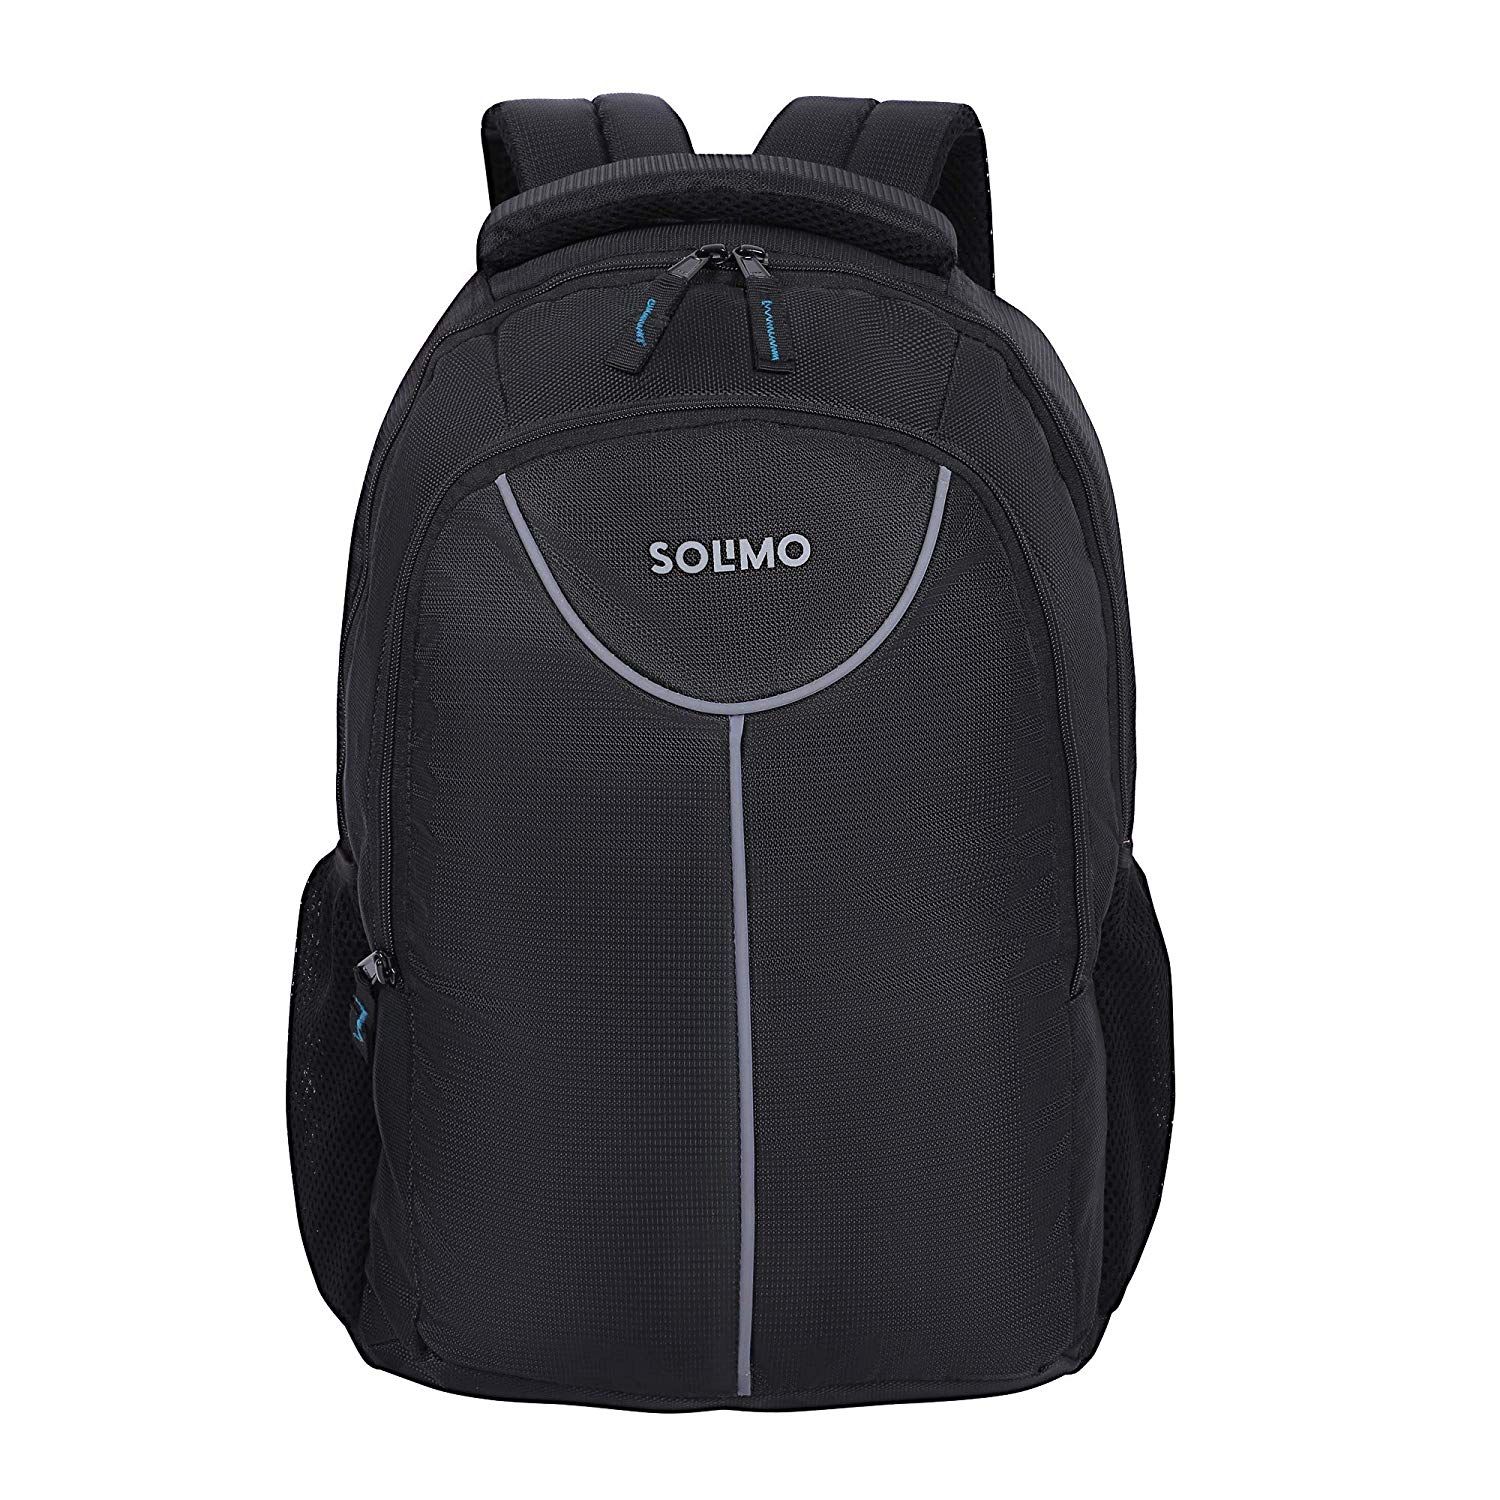 Amazon Brand - Solimo Laptop Backpack for 15.6-inch Laptops (27 litres, Black)